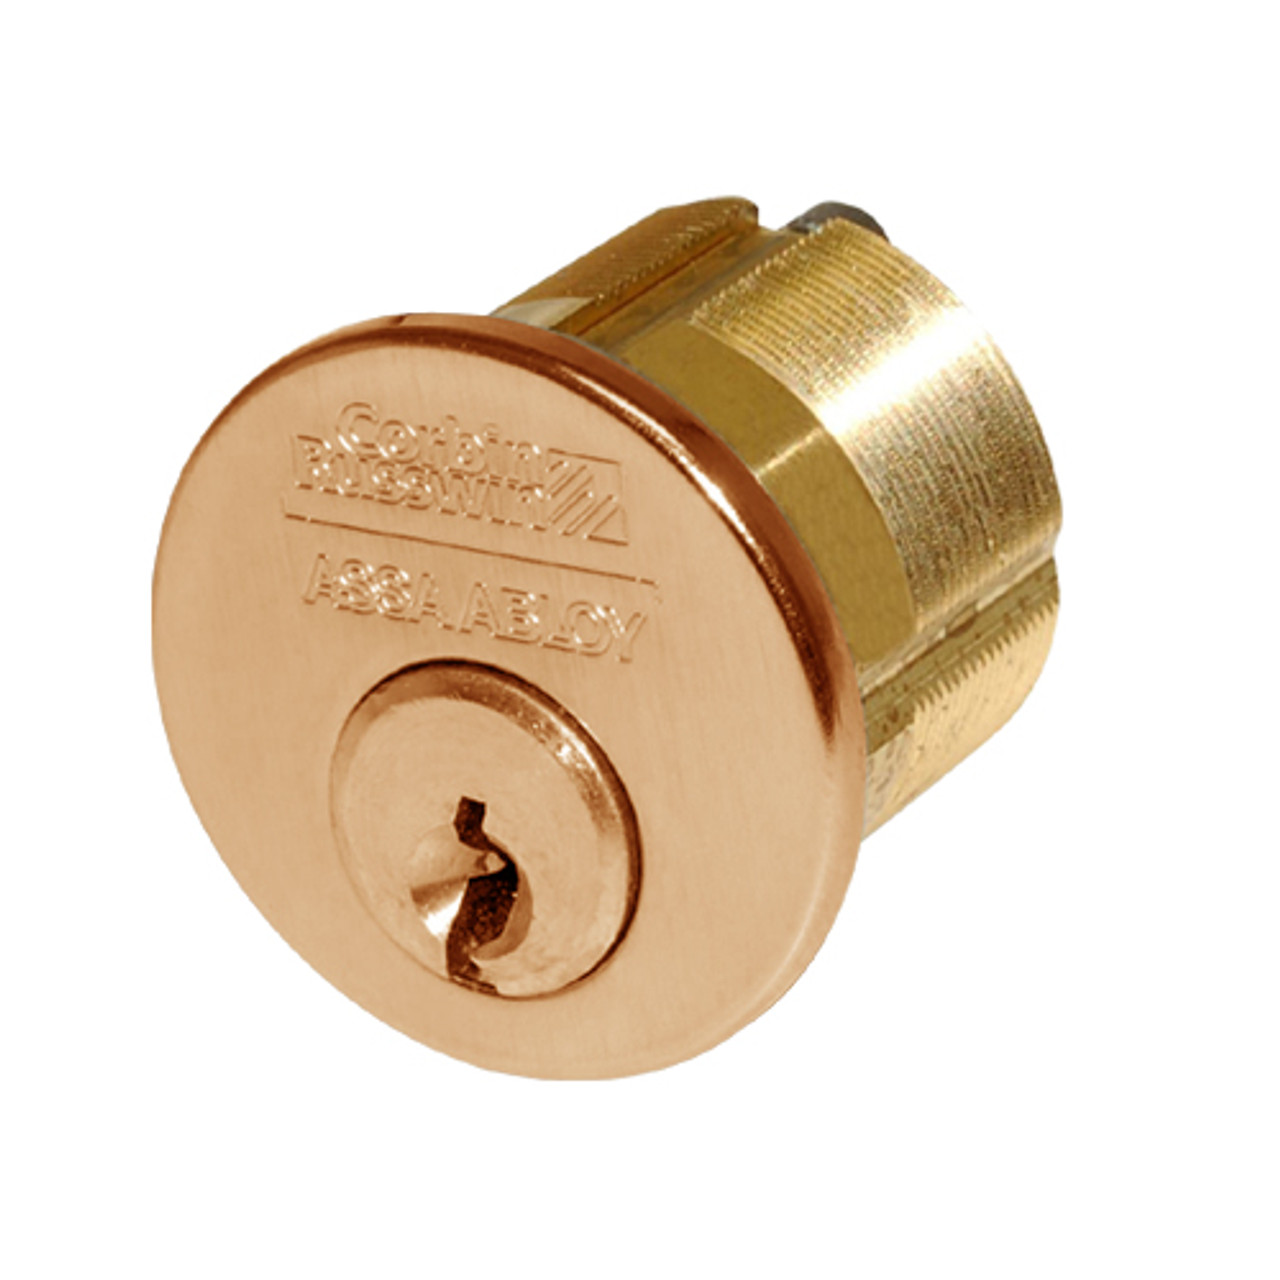 CR1000-118-A04-6-L4-612 Corbin Conventional Mortise Cylinder for Mortise Lock and DL3000 Deadlocks with DL4000 Deadlock Cam in Satin Bronze Finish